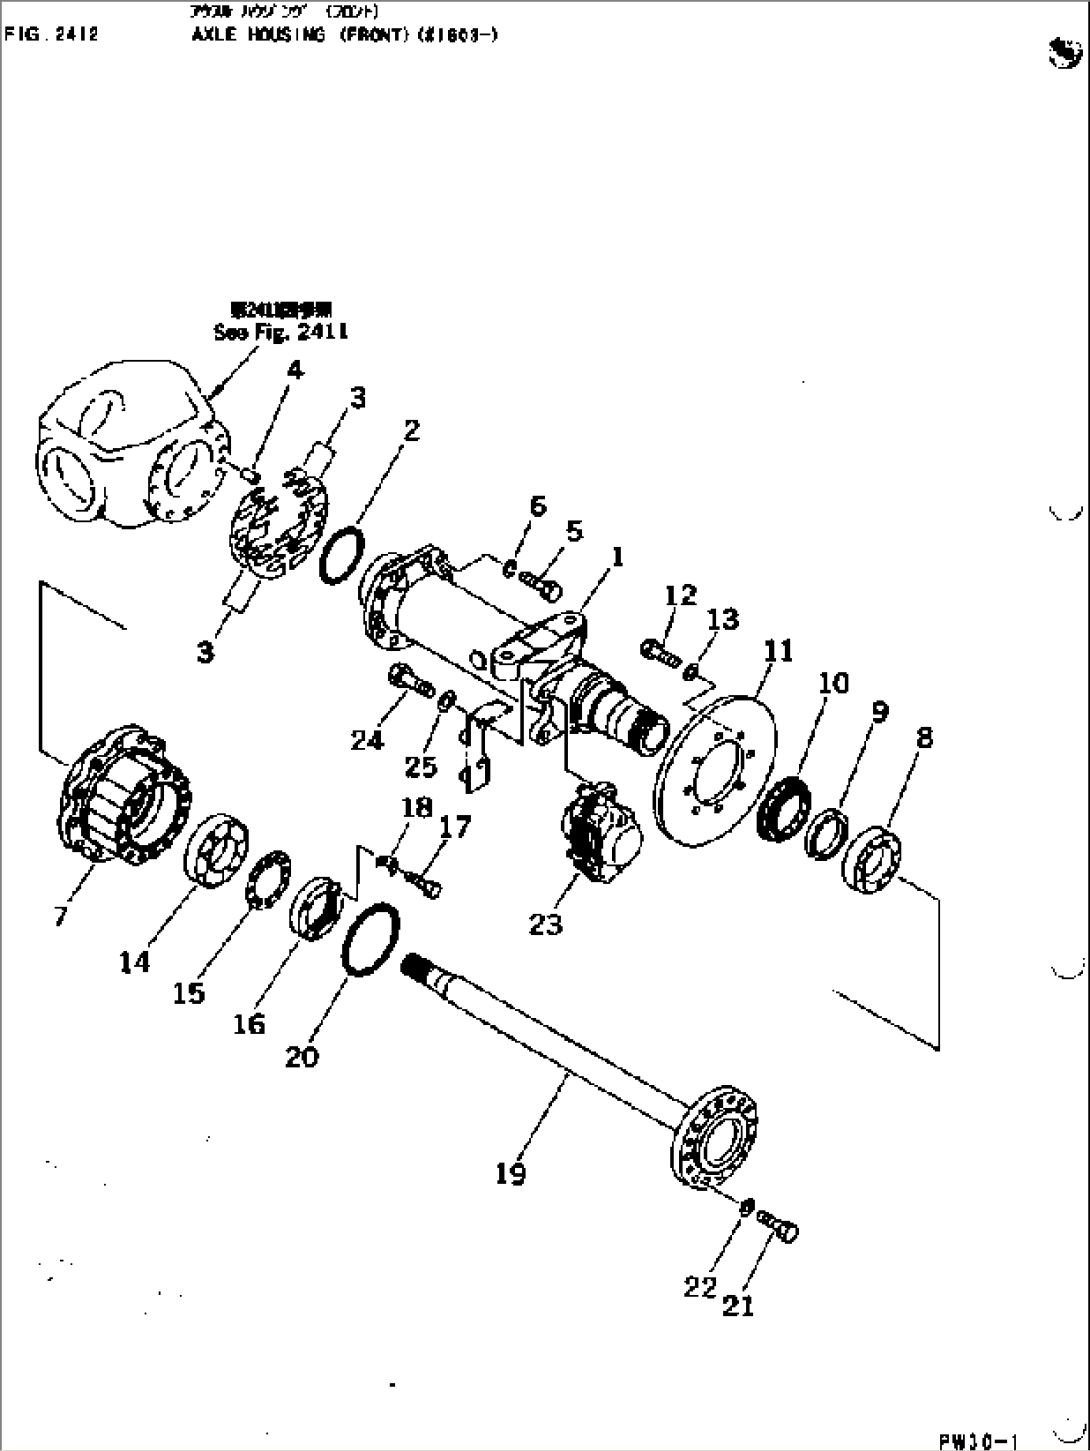 AXLE HOUSING (FRONT)(#1603-)